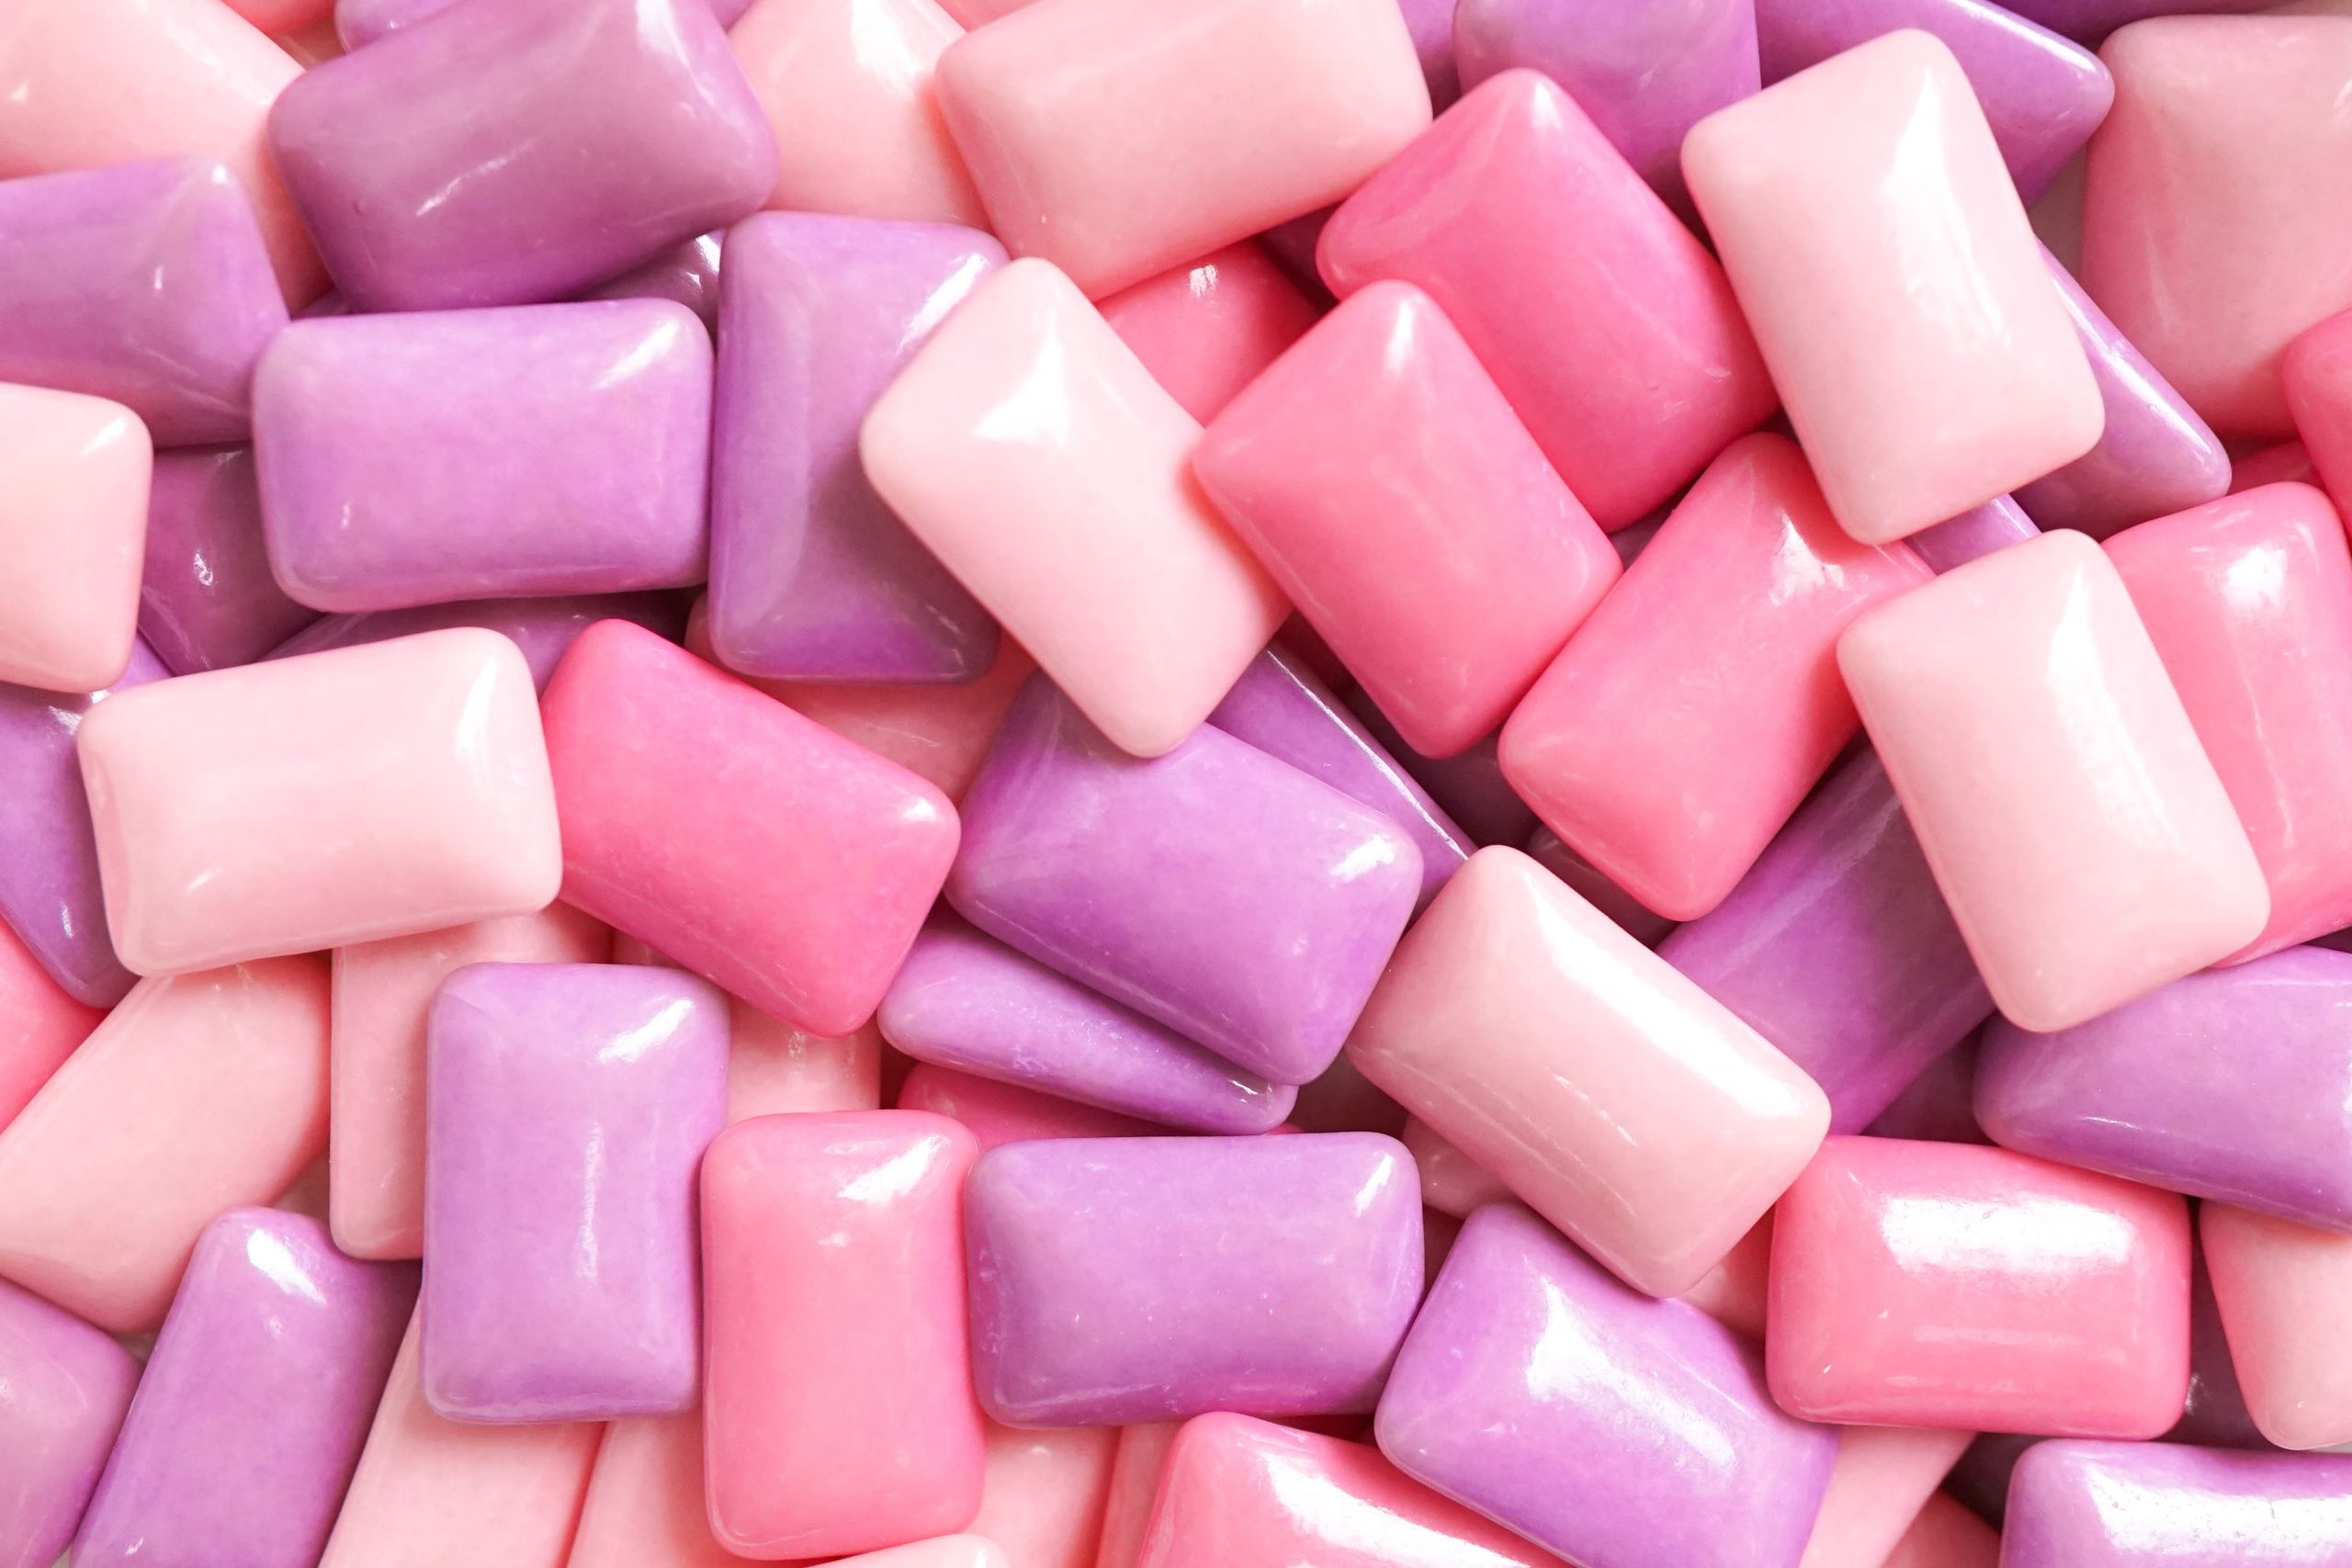 gum-a-various-shades-of-pink-and-purple-gum-for-royalty-free-image-1597017115-scaled.jpg